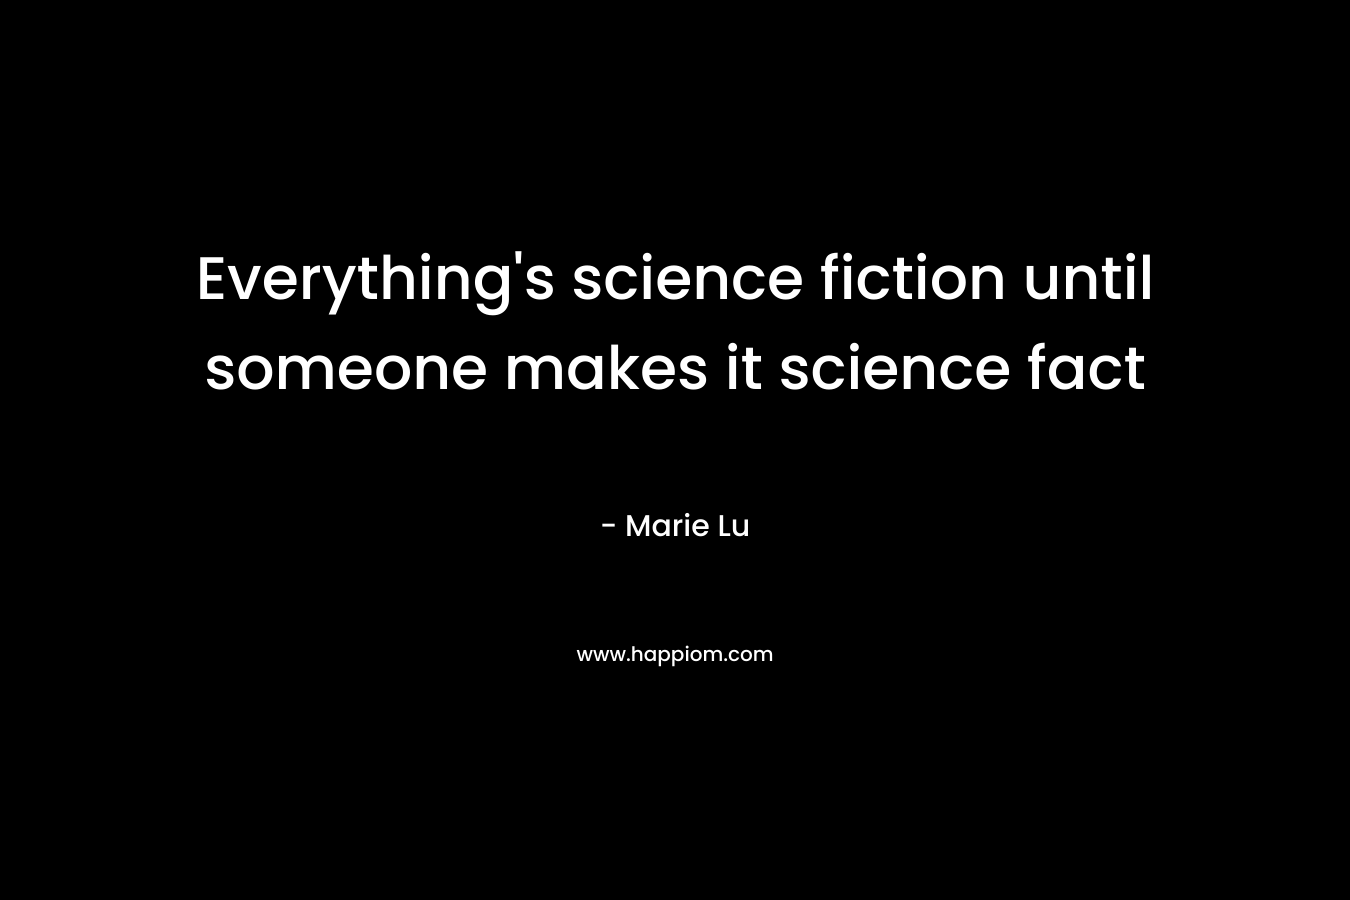 Everything's science fiction until someone makes it science fact